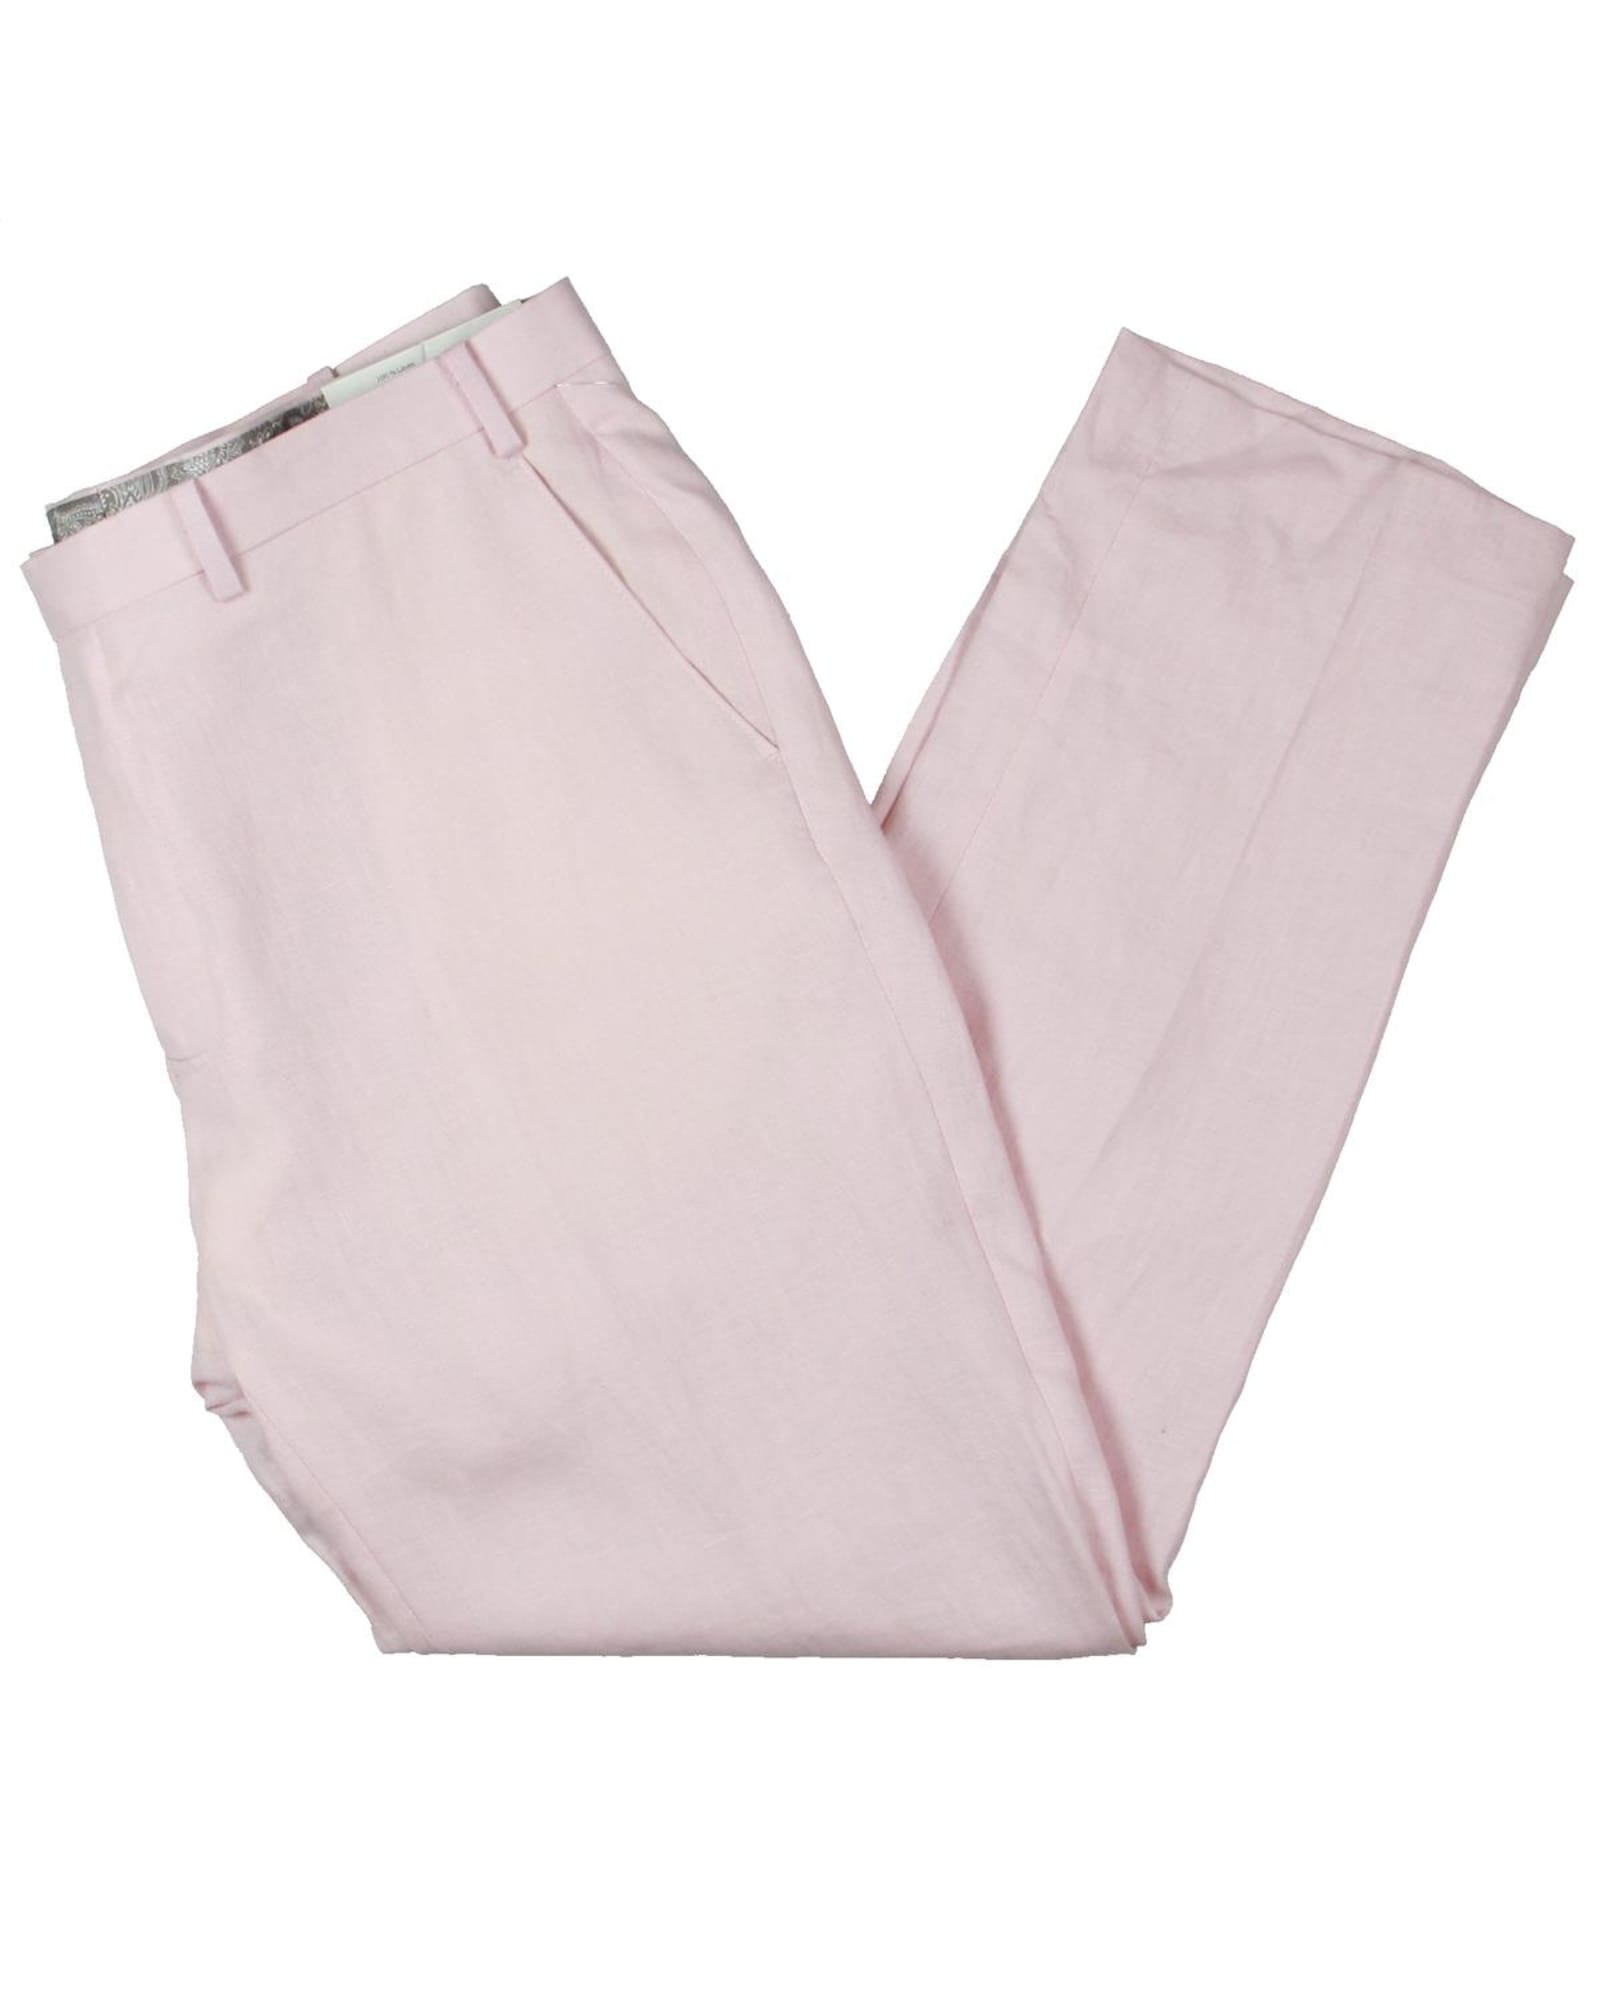 Pink Pants For Women